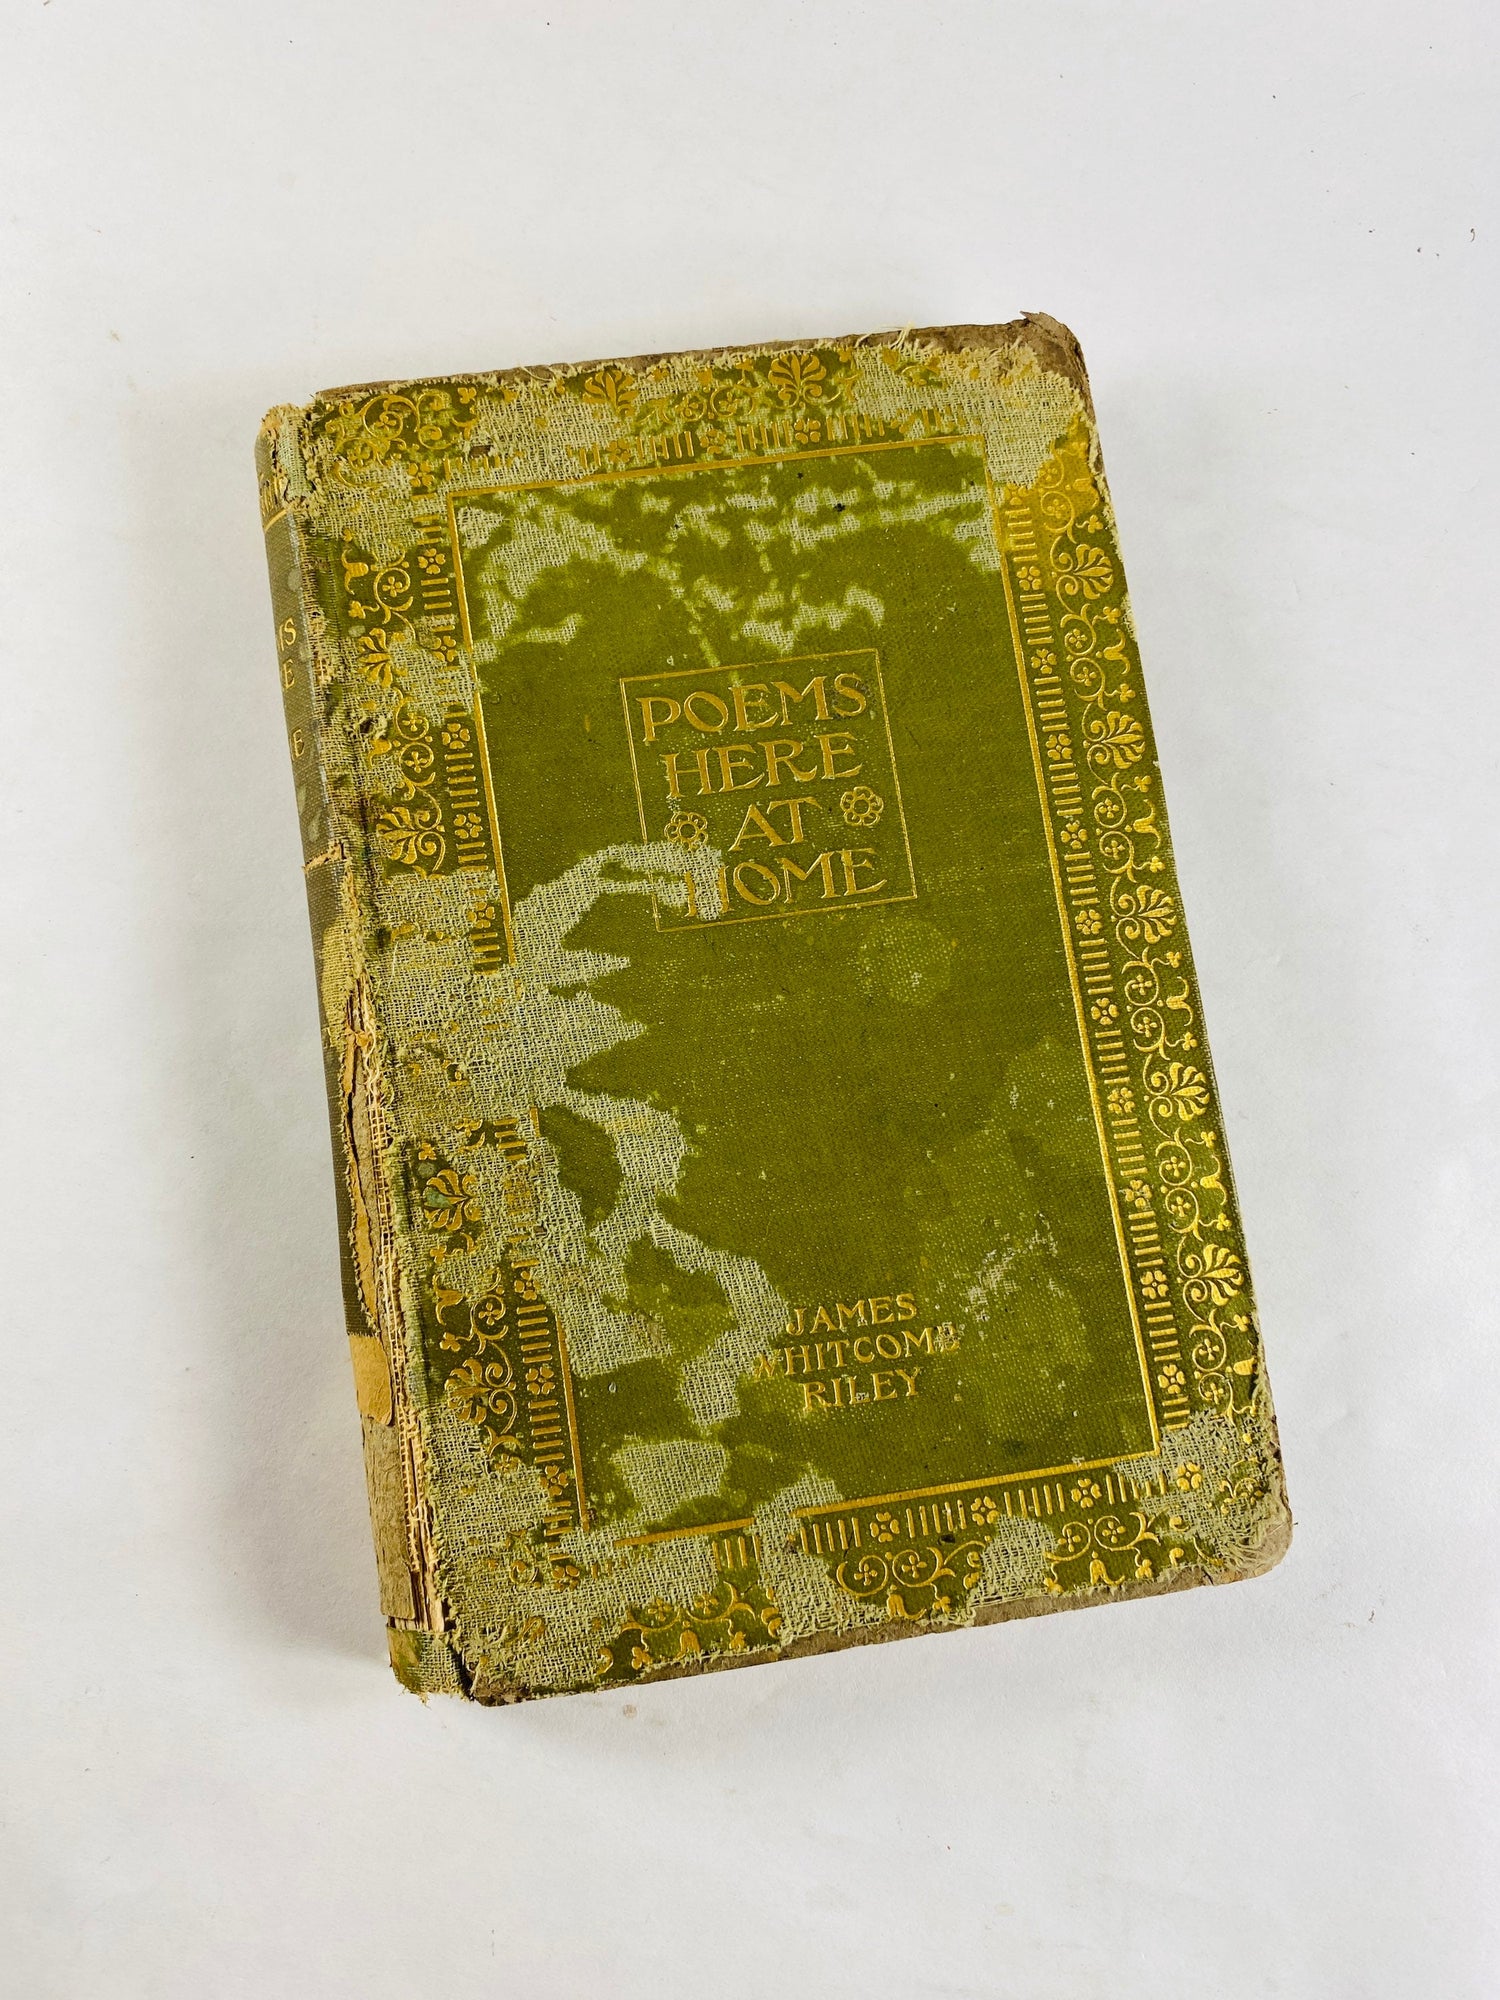 1896 Poems Here at Home by EARLY PRINTING James Whitcomb Riley Vintage book of poetry by this Indiana poet Green vellum embossed gold decor